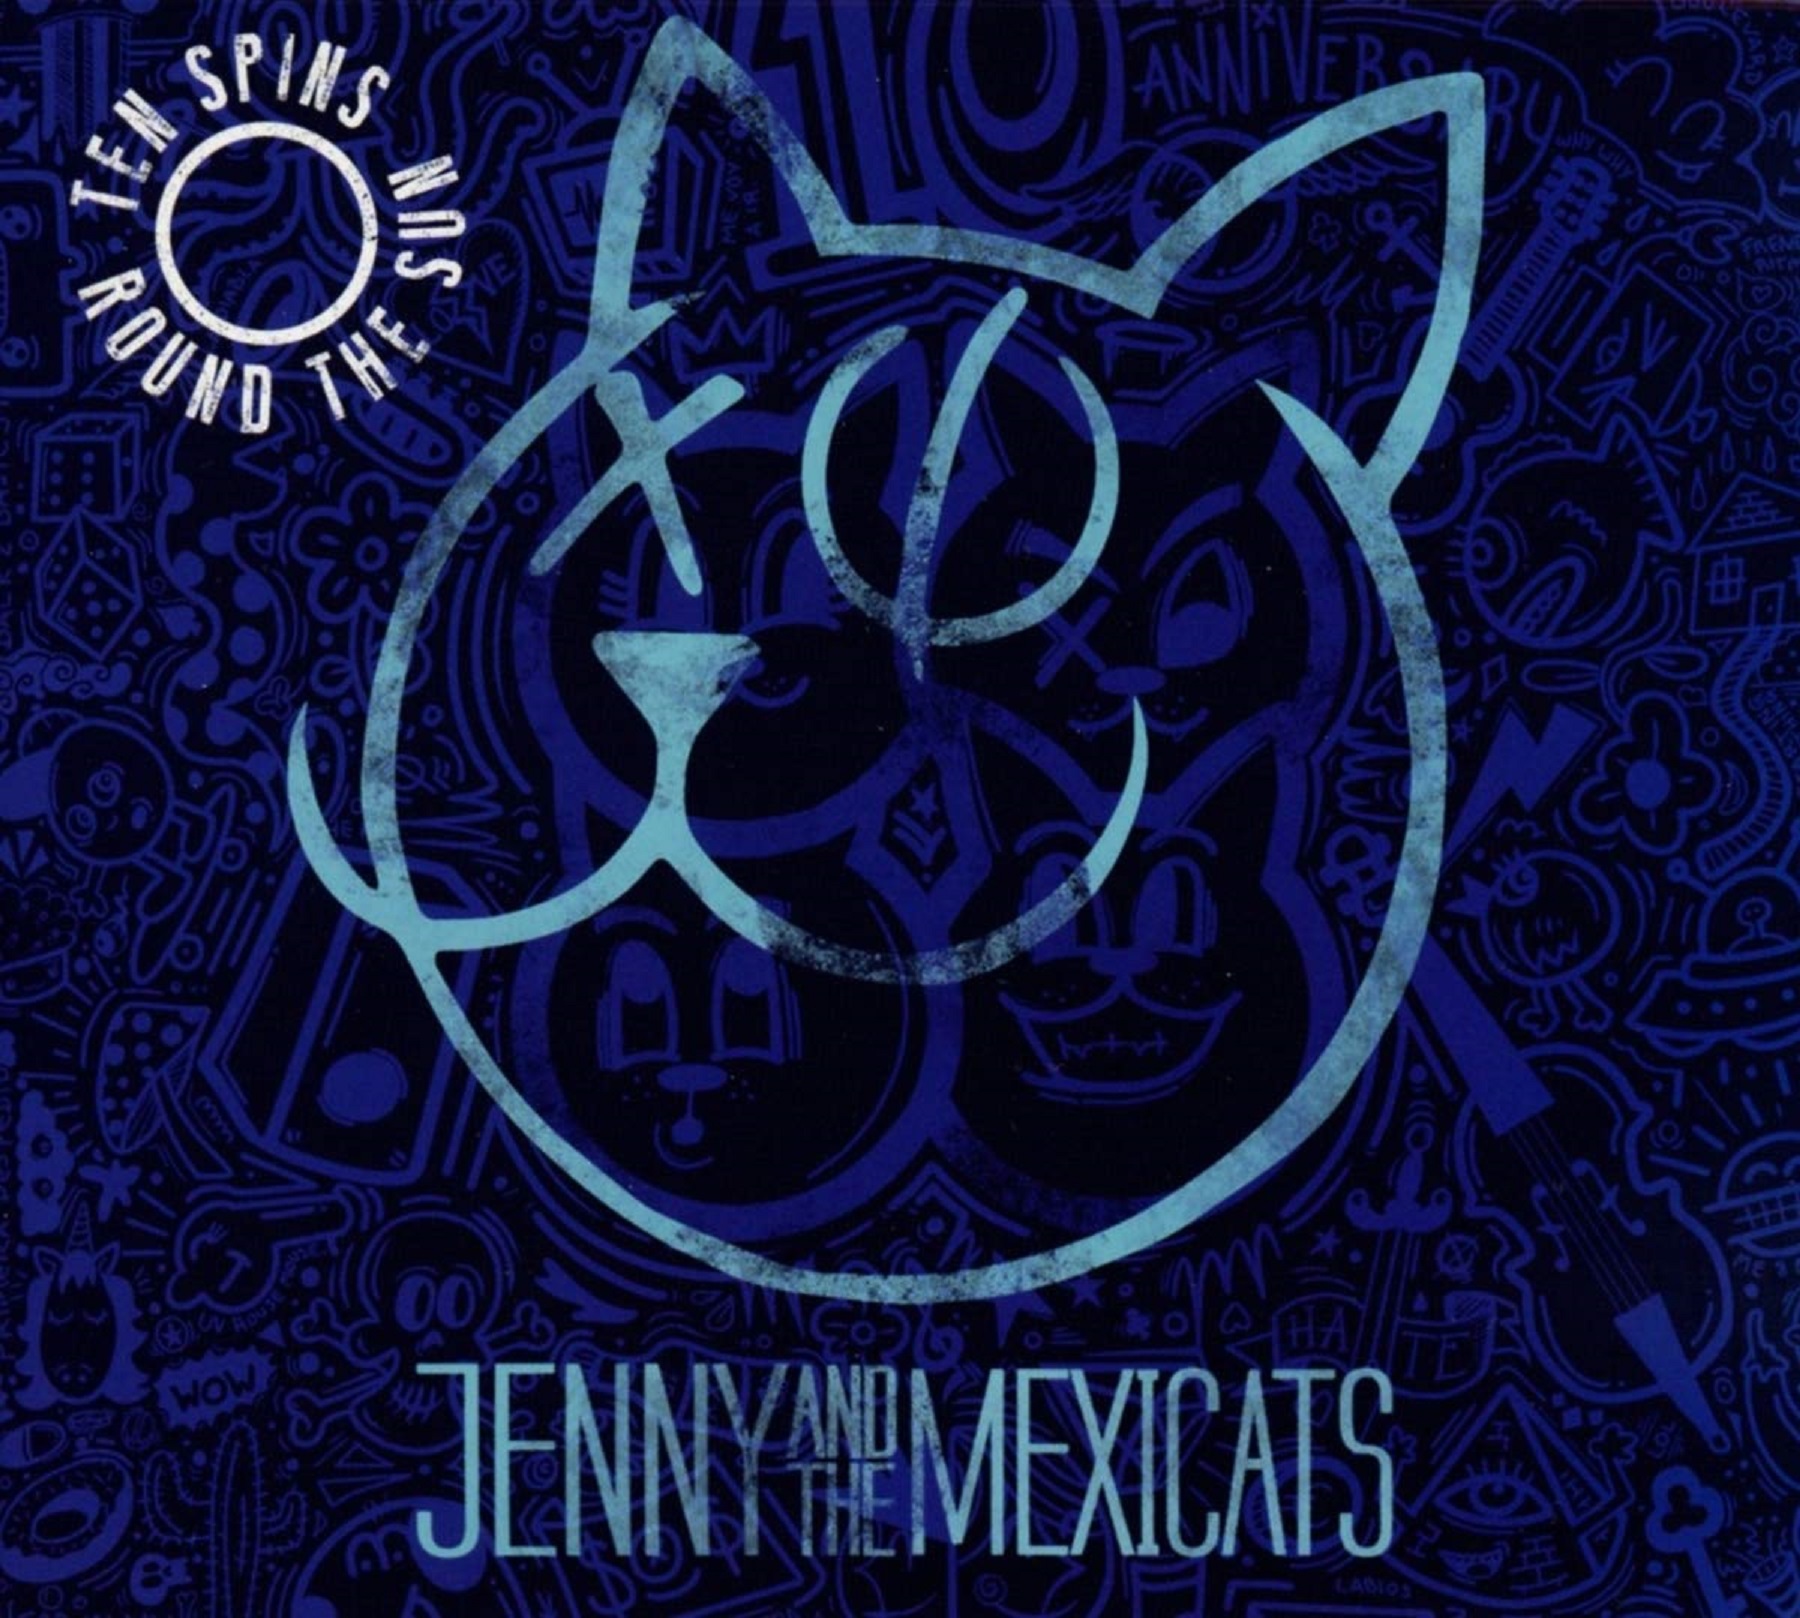 Jenny And The Mexicats - Ten Spins Round The Sun (10 Year Anniversary)